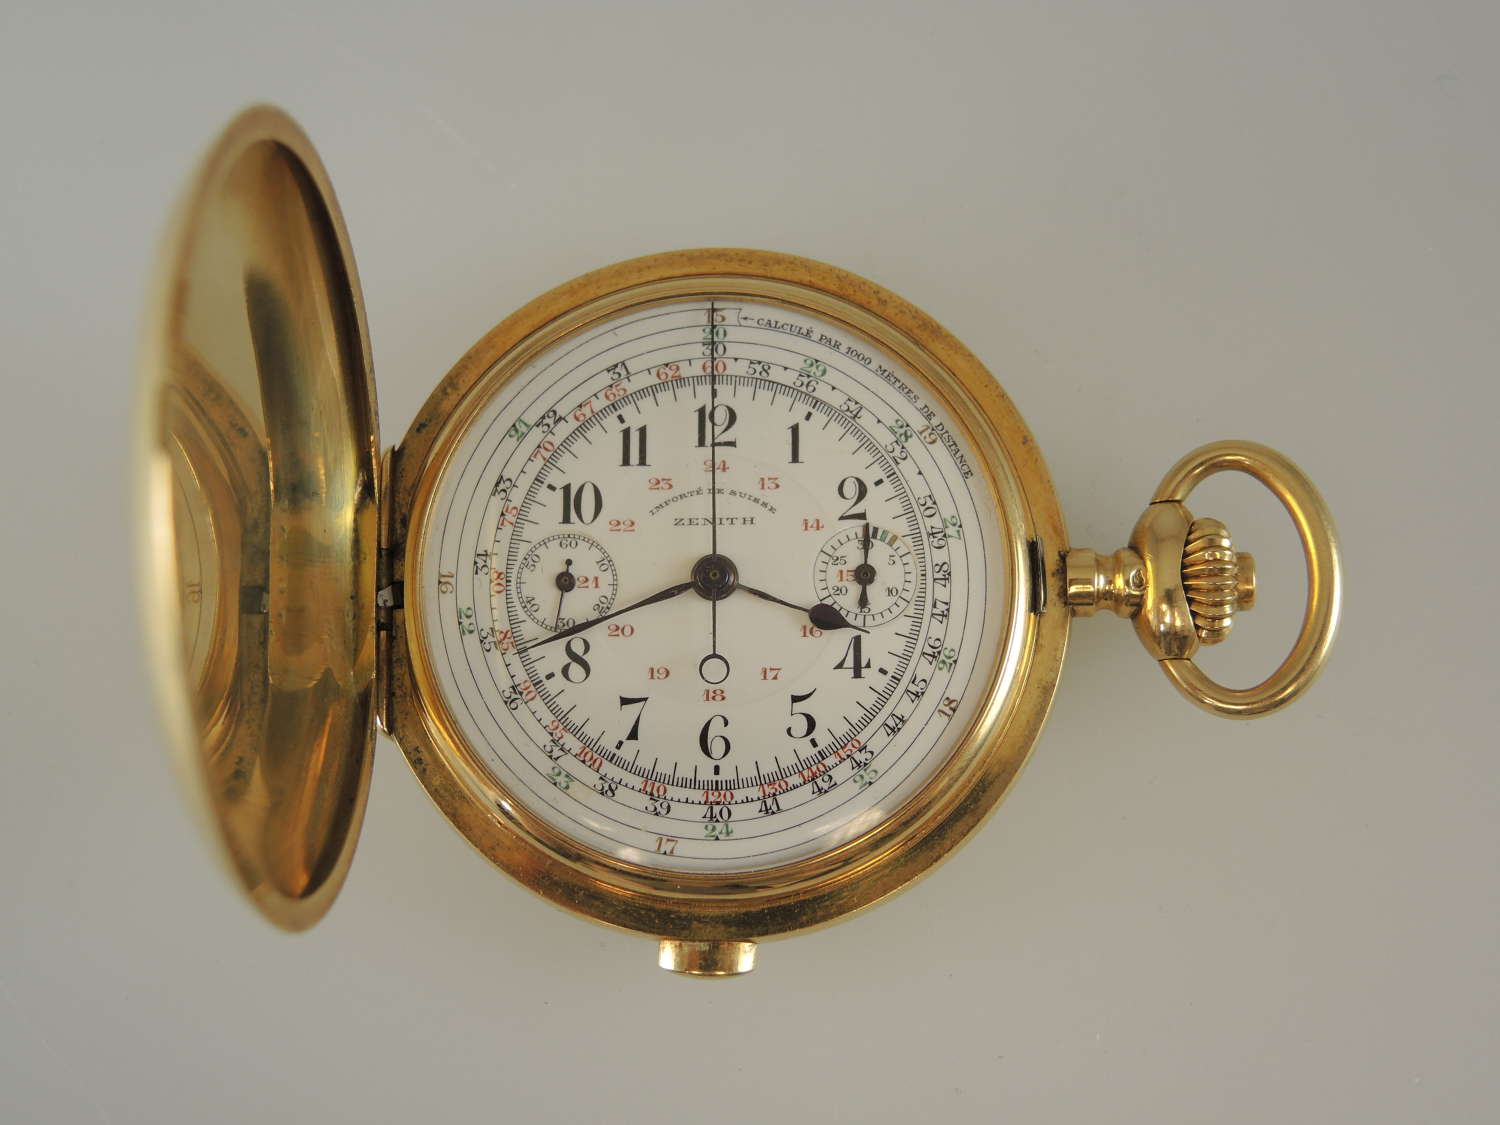 18K gold full hunter pocket watch by Zenith with chronograph c1925